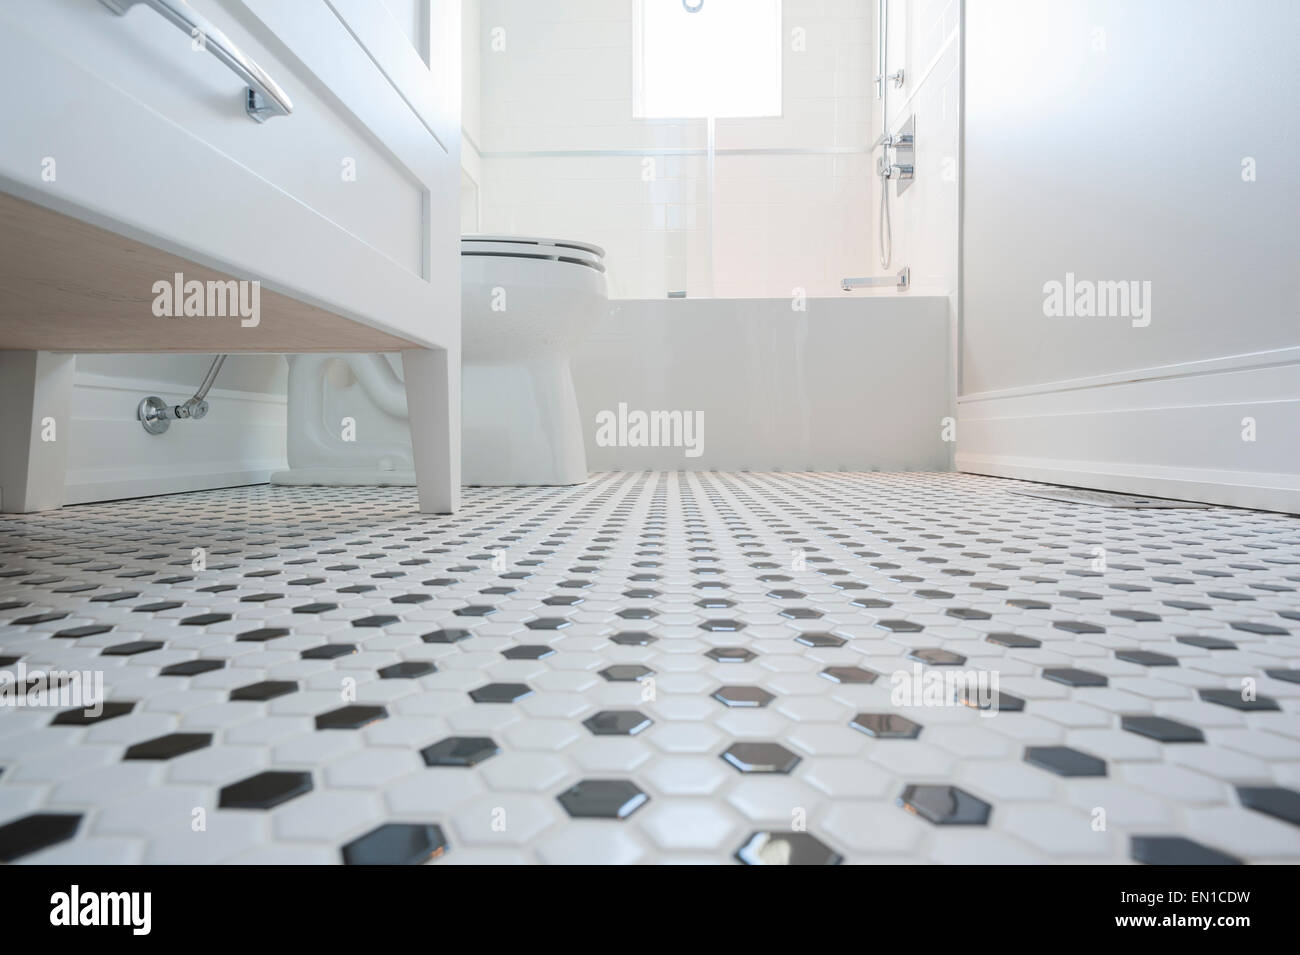 Low Angle Detail Shot Of Tiled Bathroom Floor Stock Photo Royalty